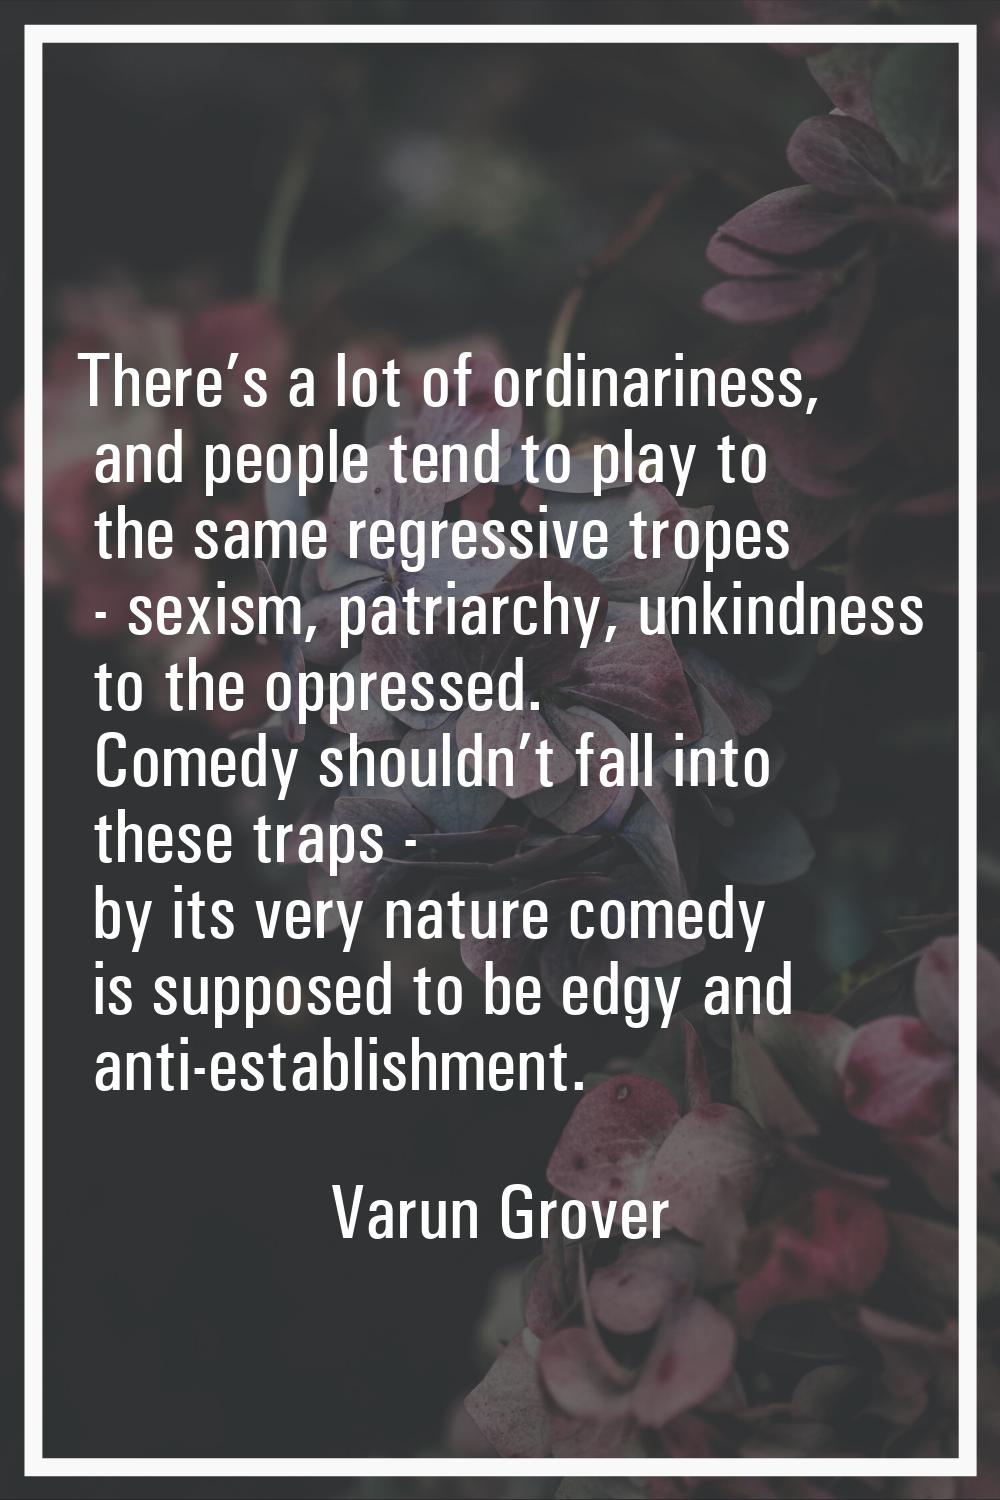 There’s a lot of ordinariness, and people tend to play to the same regressive tropes - sexism, patr